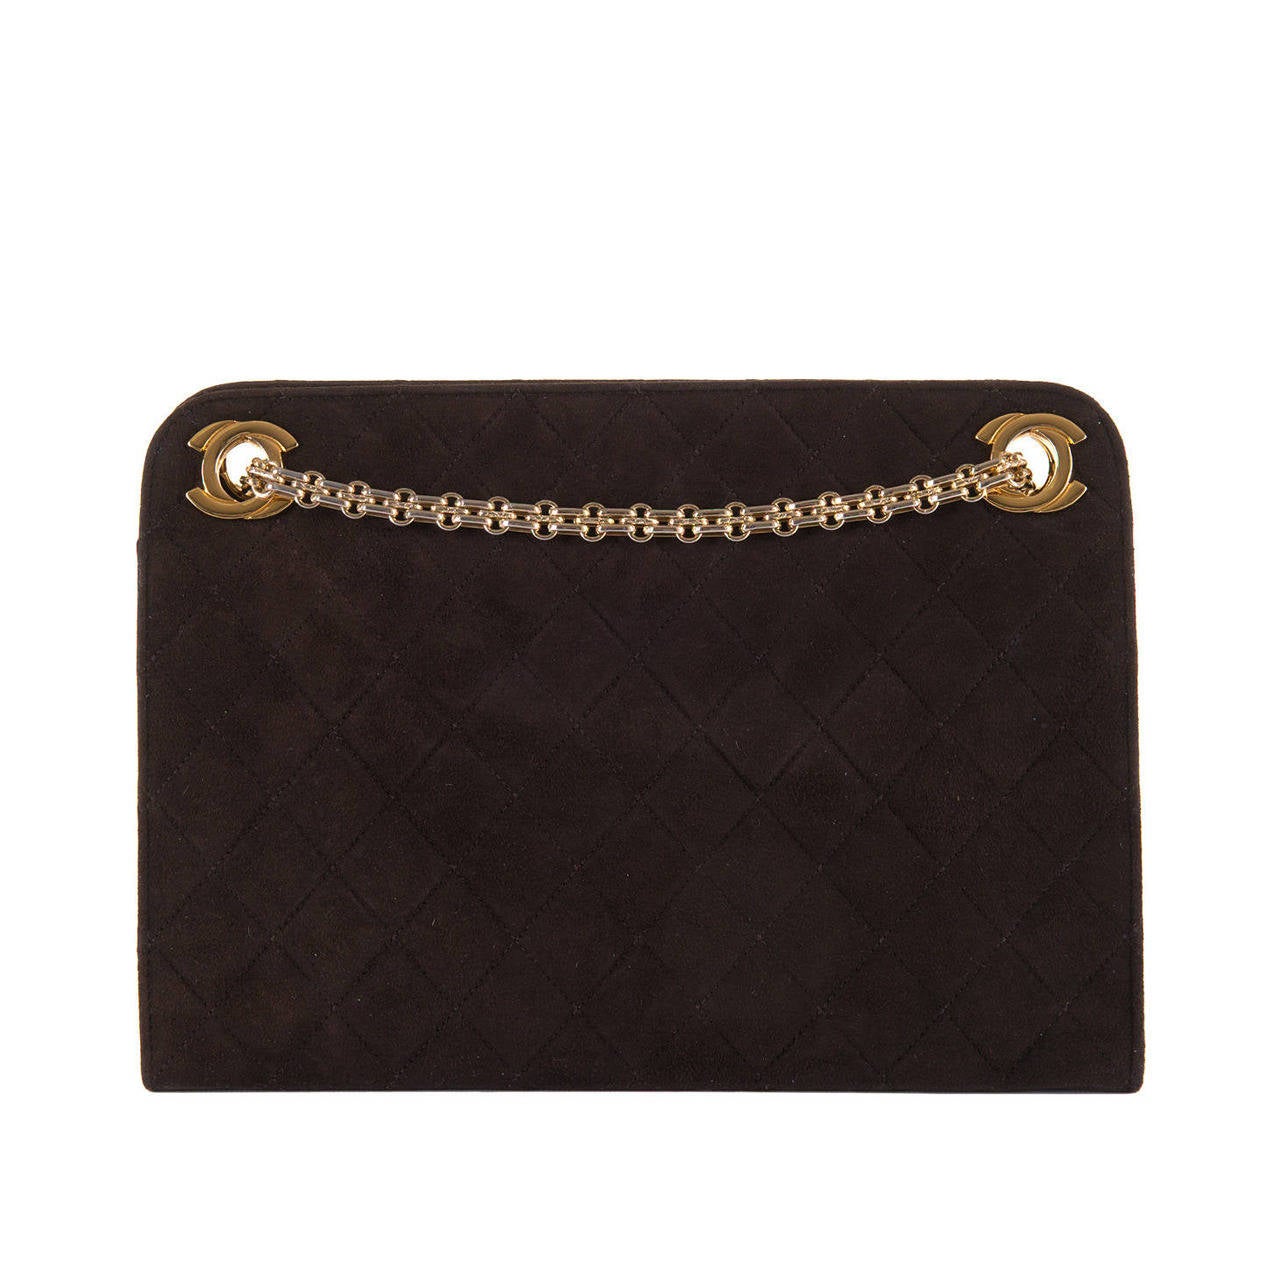 An Elegant Chanel Quilted Handbag, in Choc. Brown with Goldtone Hardware